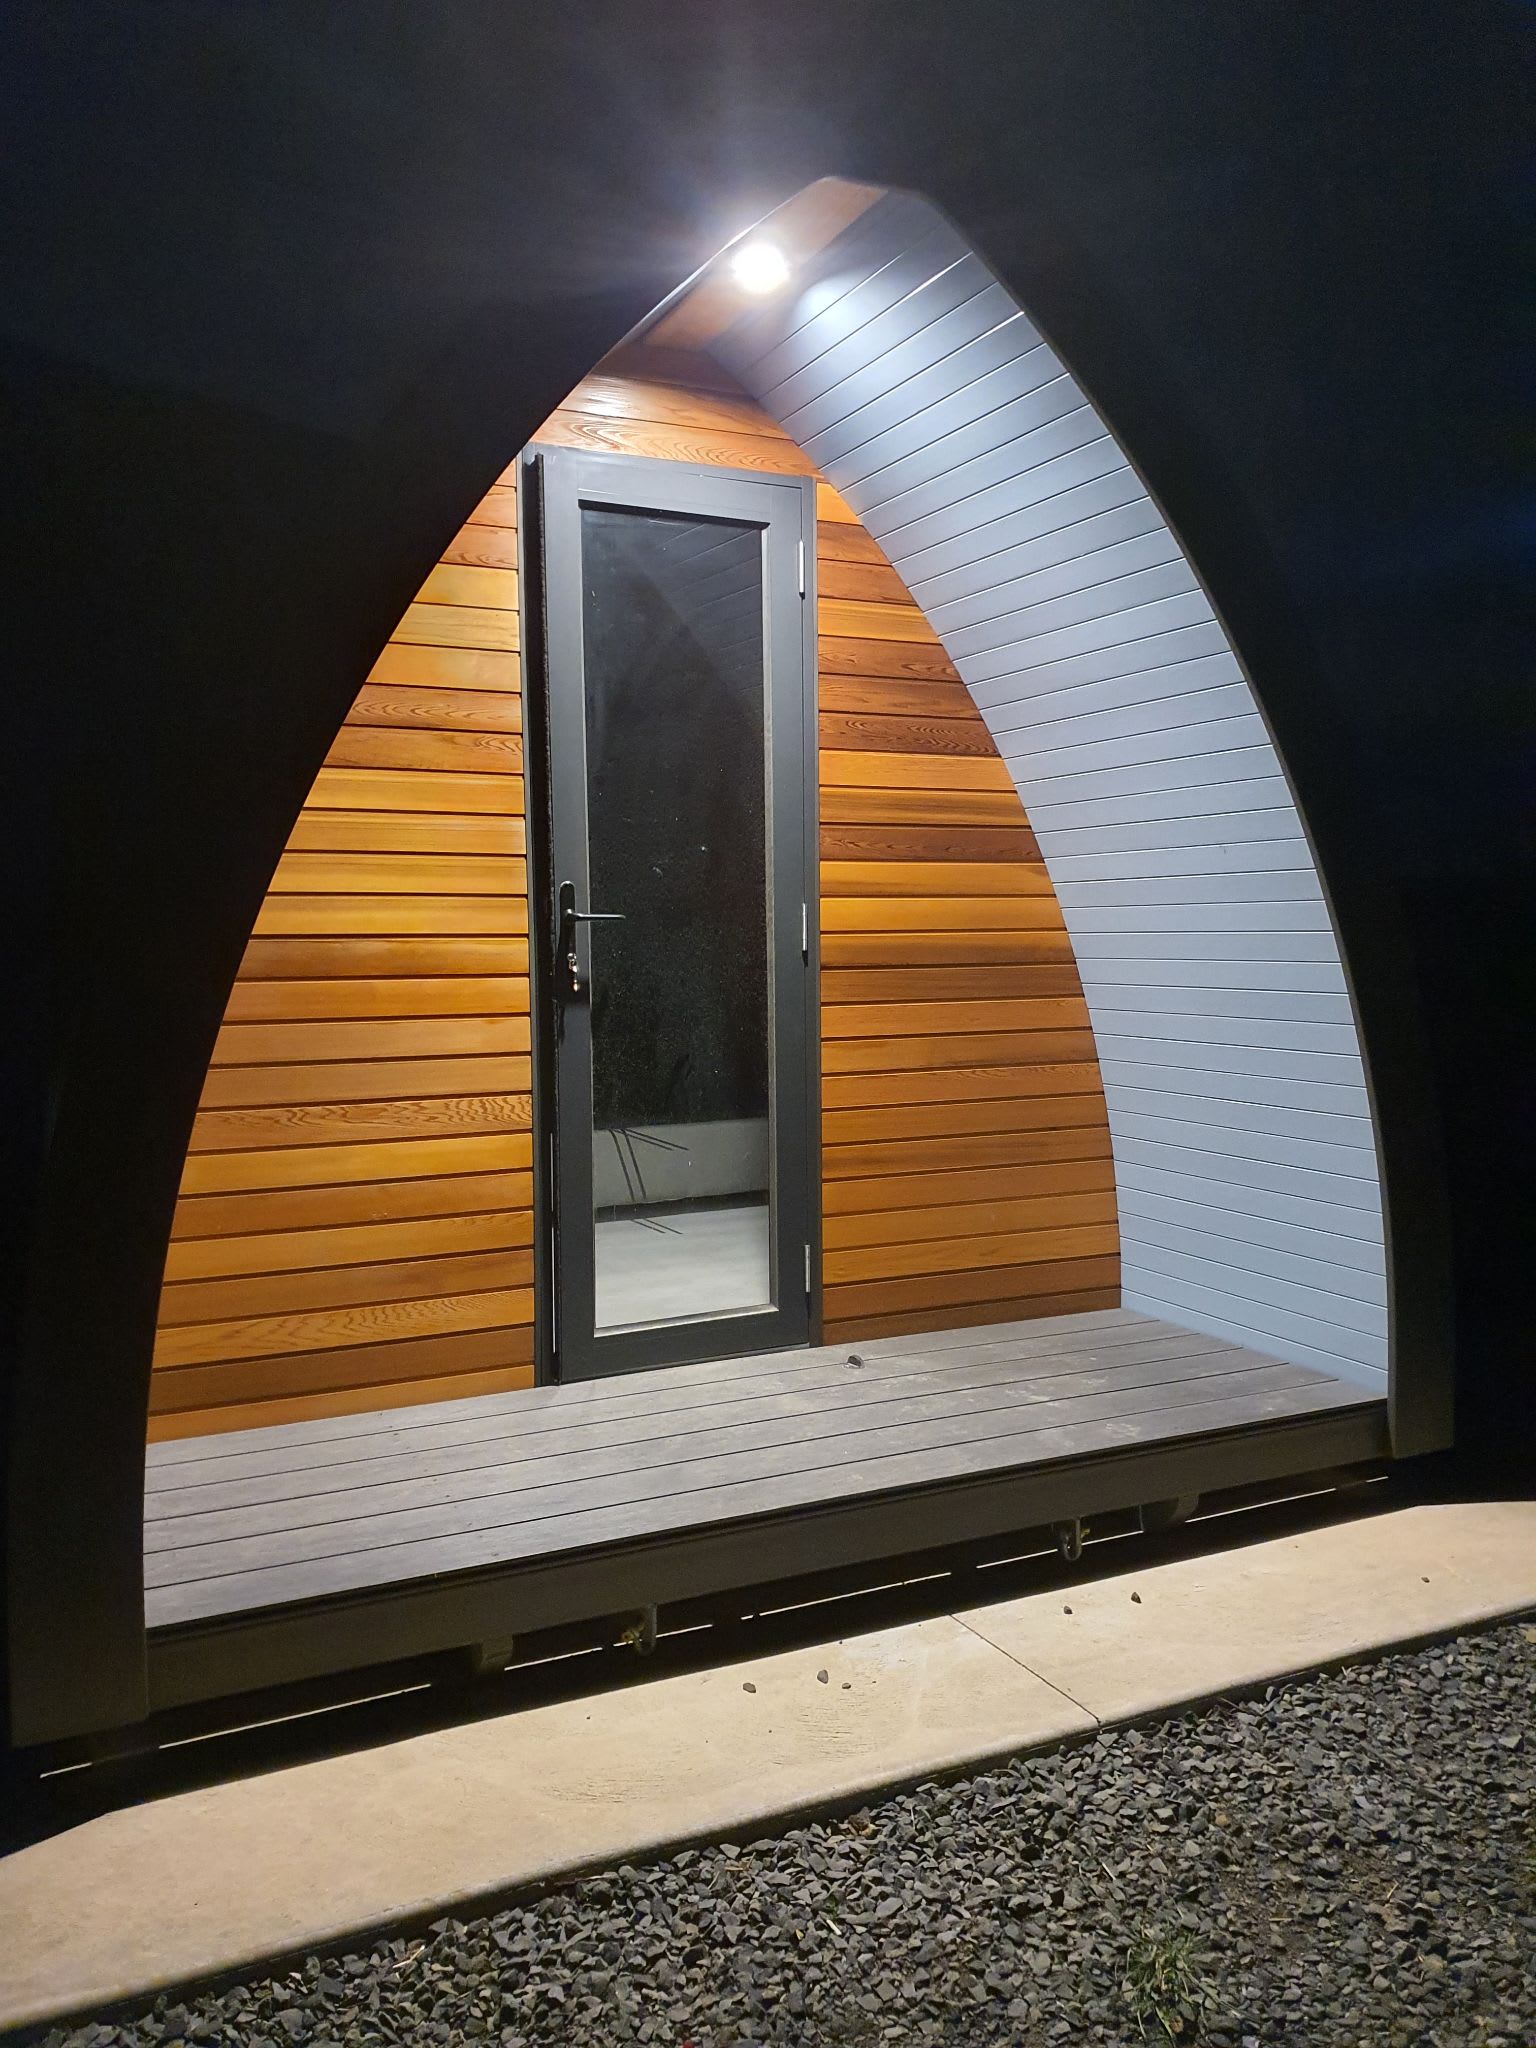 The Glamping Pod